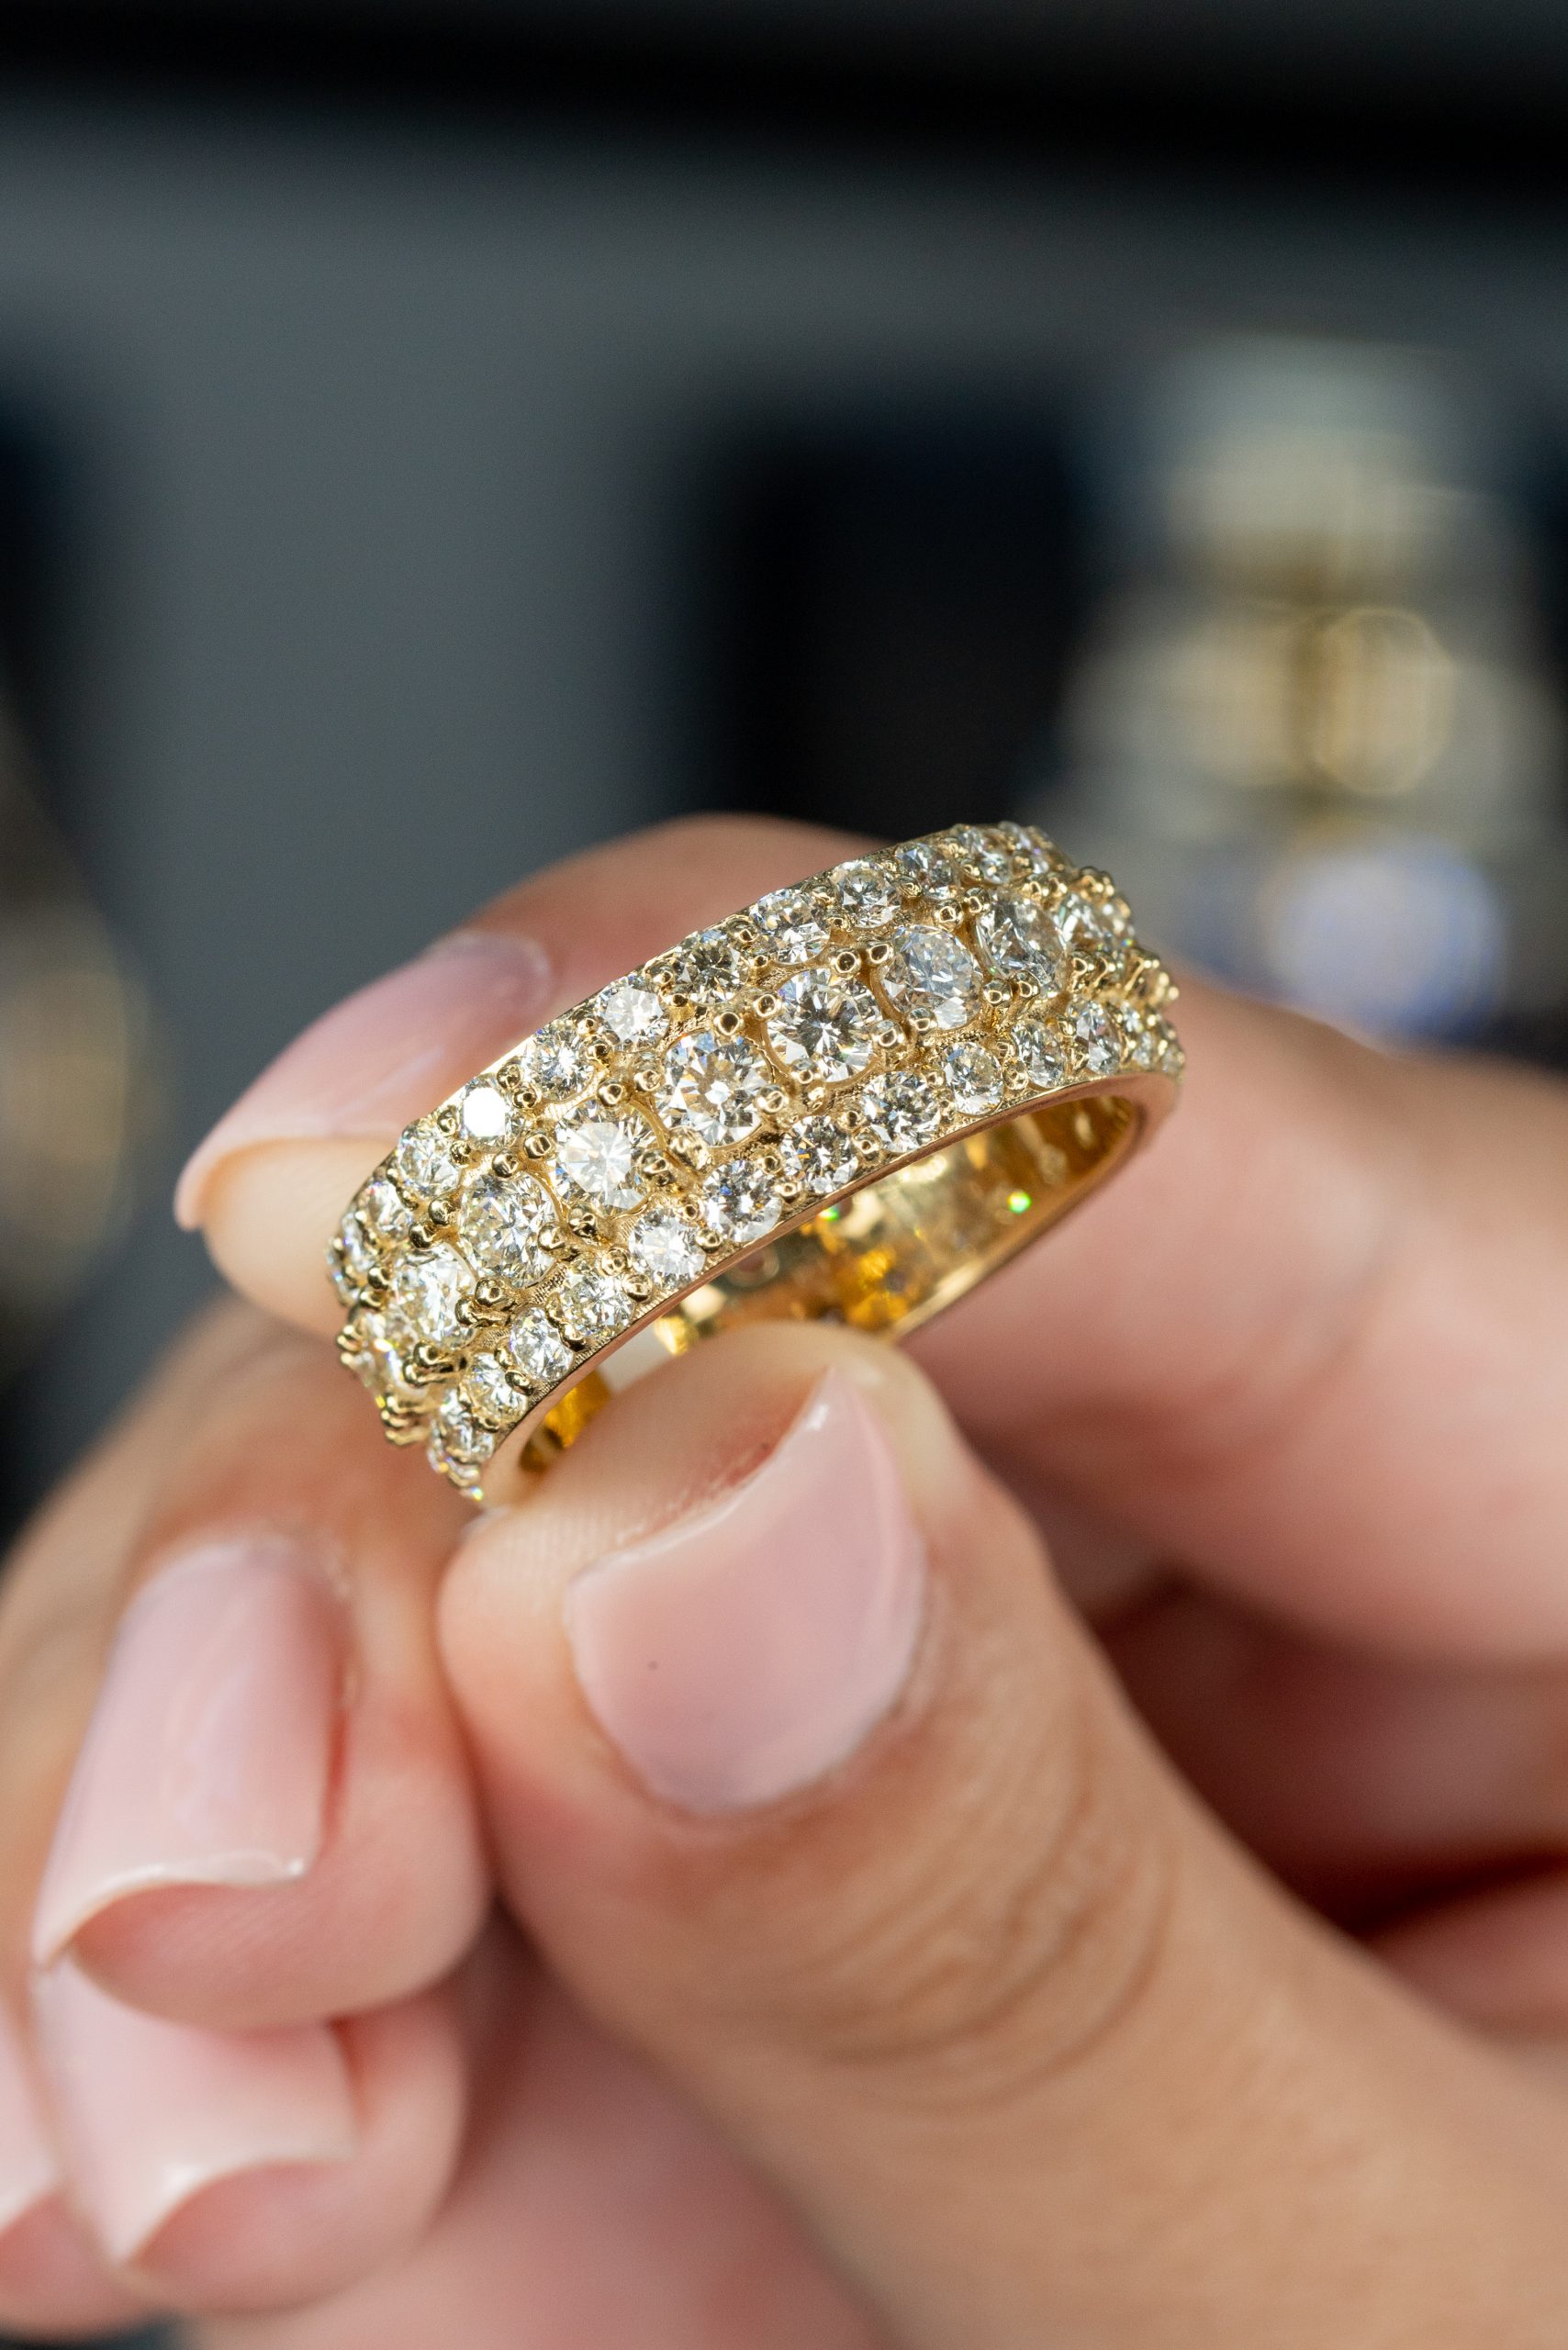 shop for luxury engagement rings